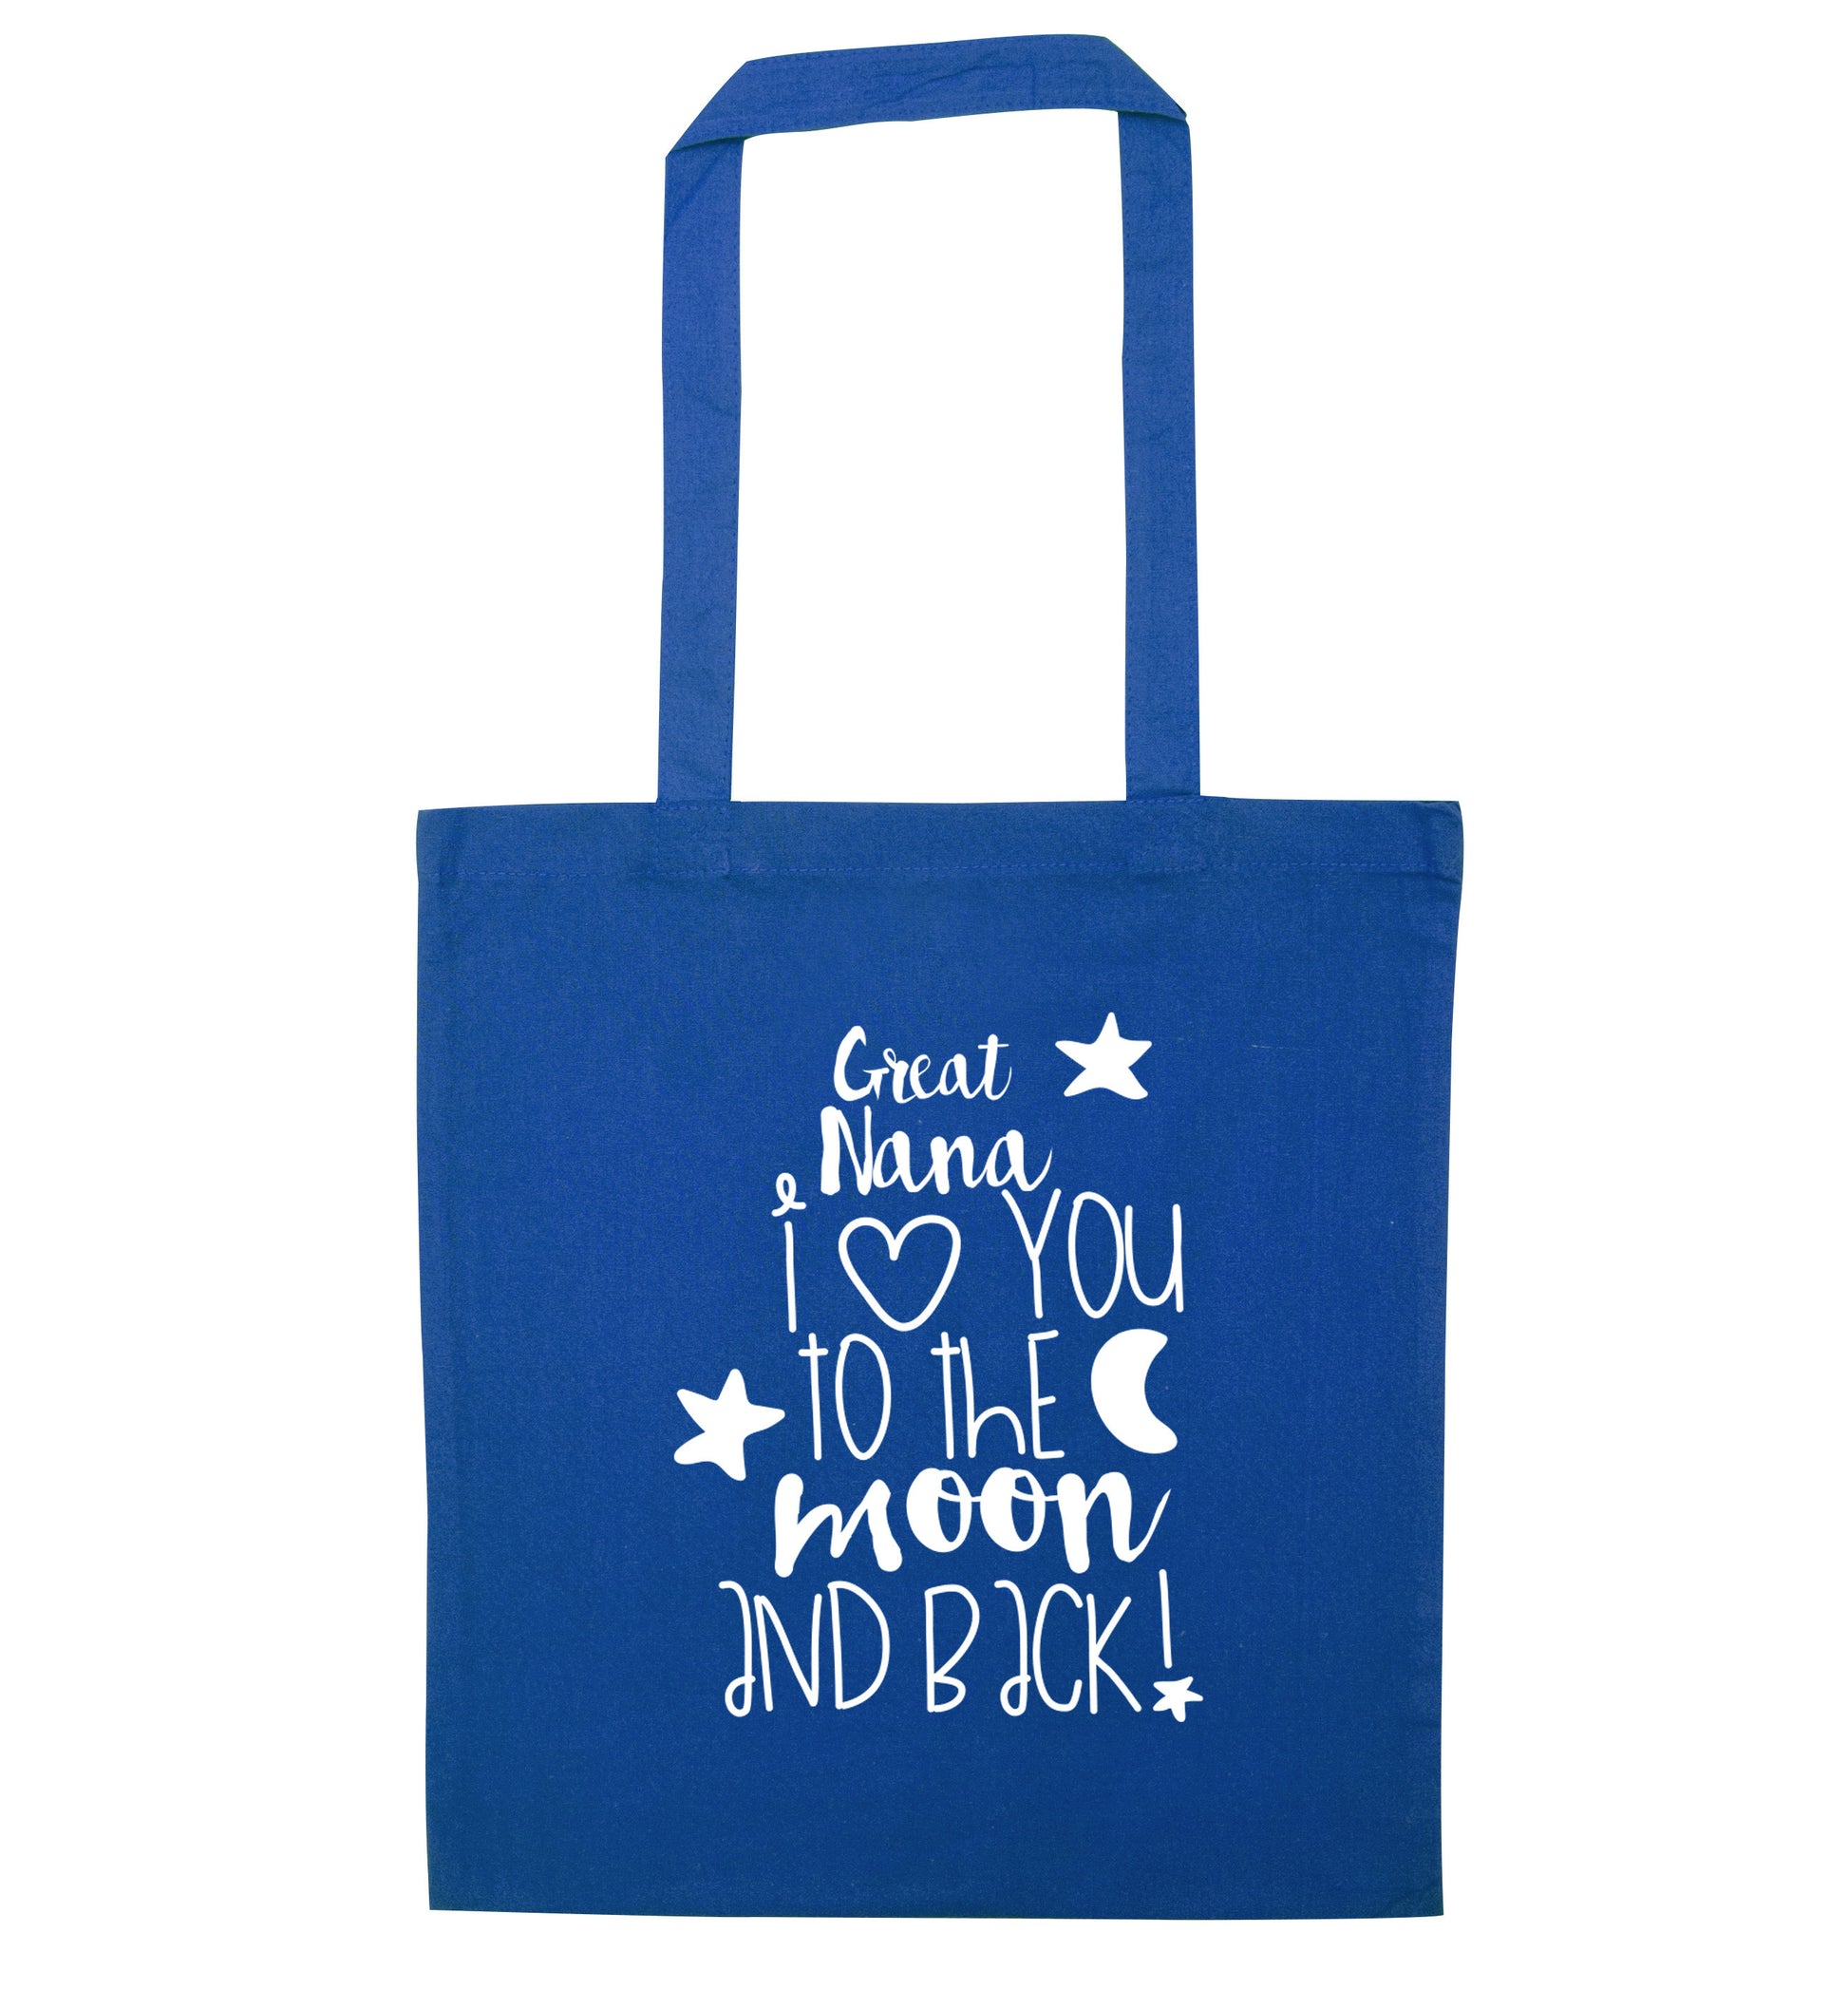 Great Nana I love you to the moon and back blue tote bag